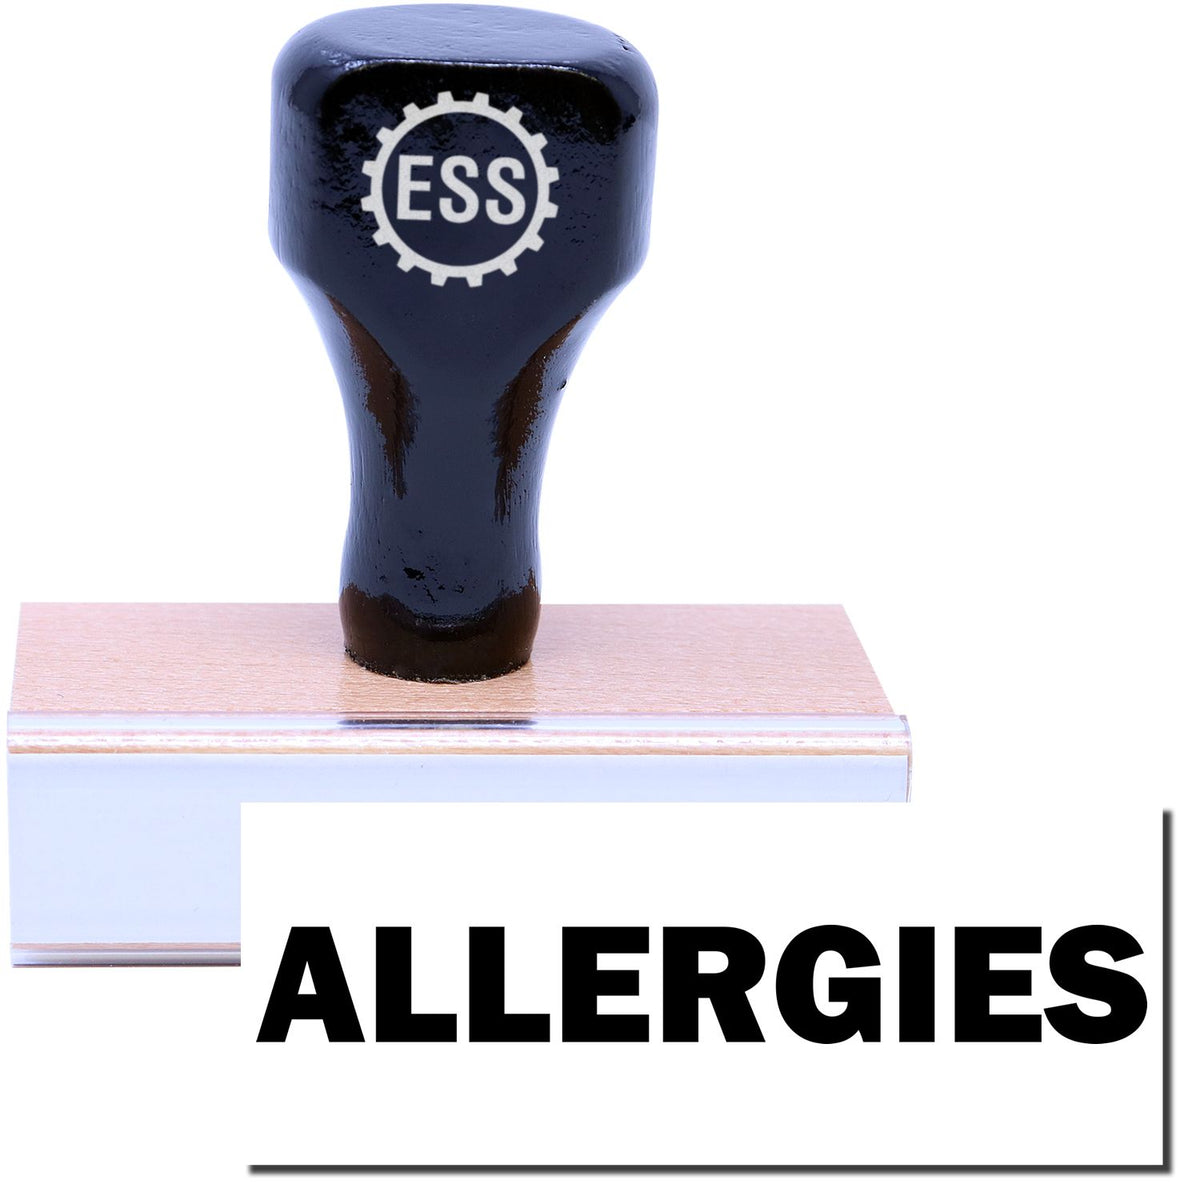 A stock office rubber stamp with a stamped image showing how the text &quot;ALLERGIES&quot; in bold font is displayed after stamping.